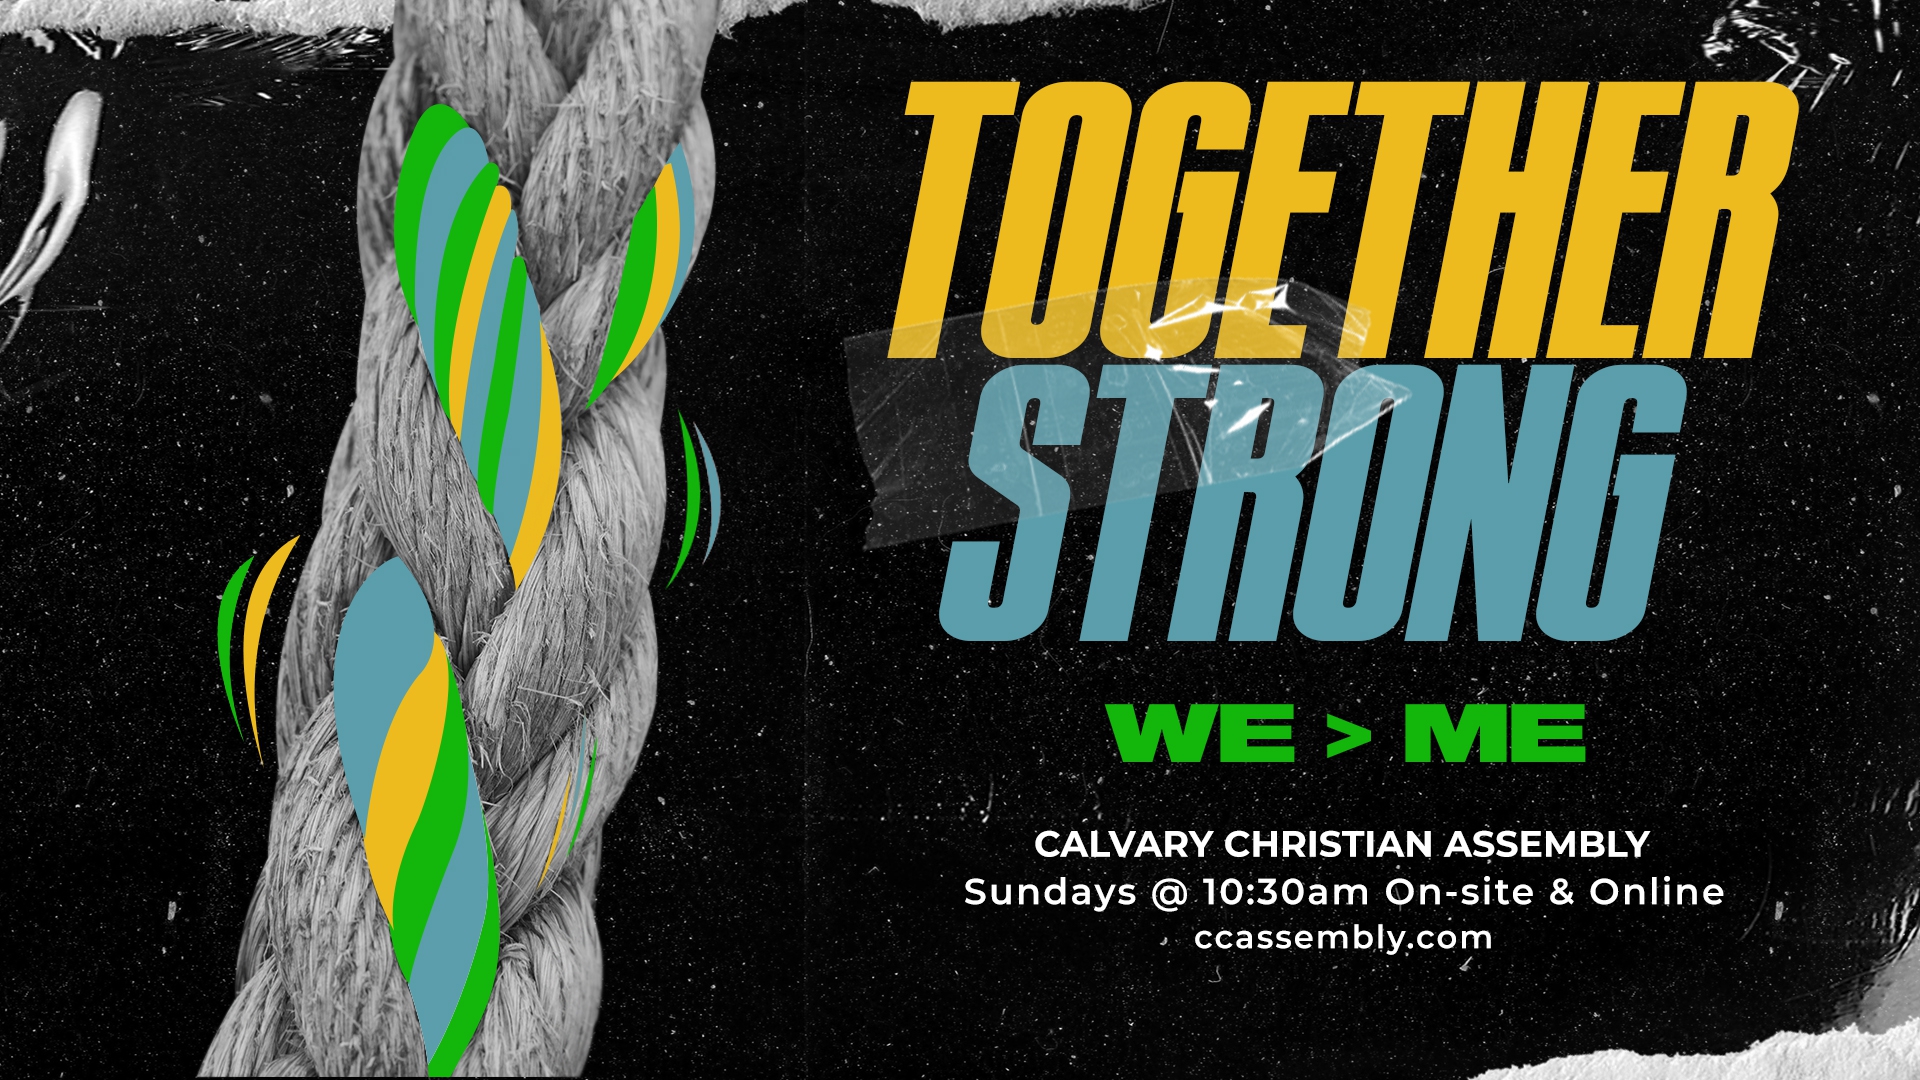 Together Strong:We > Me - HOW WE CAN COME TOGETHER AND STOP THE FIGHTING THAT TEARS US APART